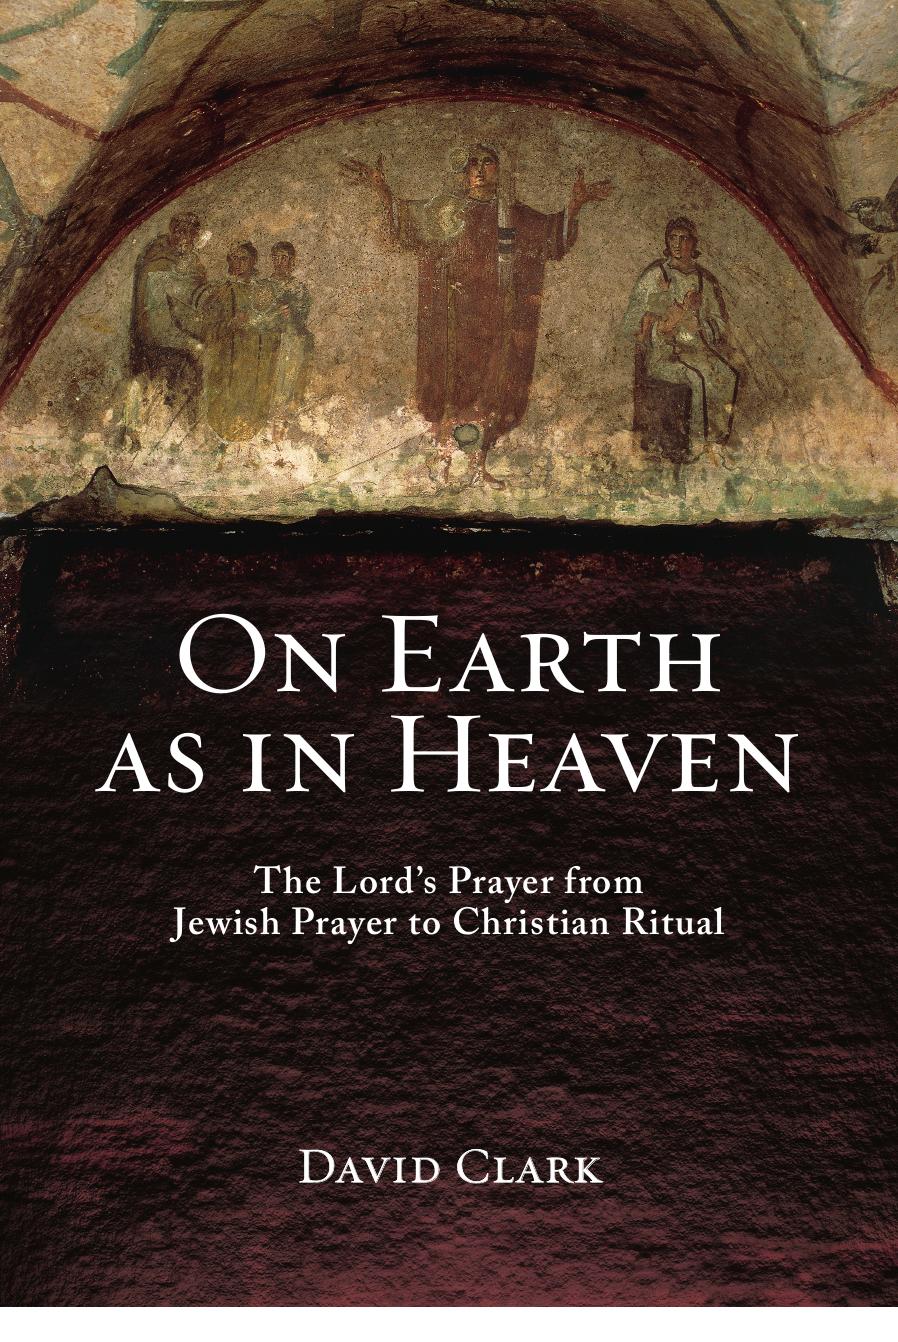 On Earth as in Heaven The Lord’s Prayer from Jewish Prayer to Christian Ritual 2017